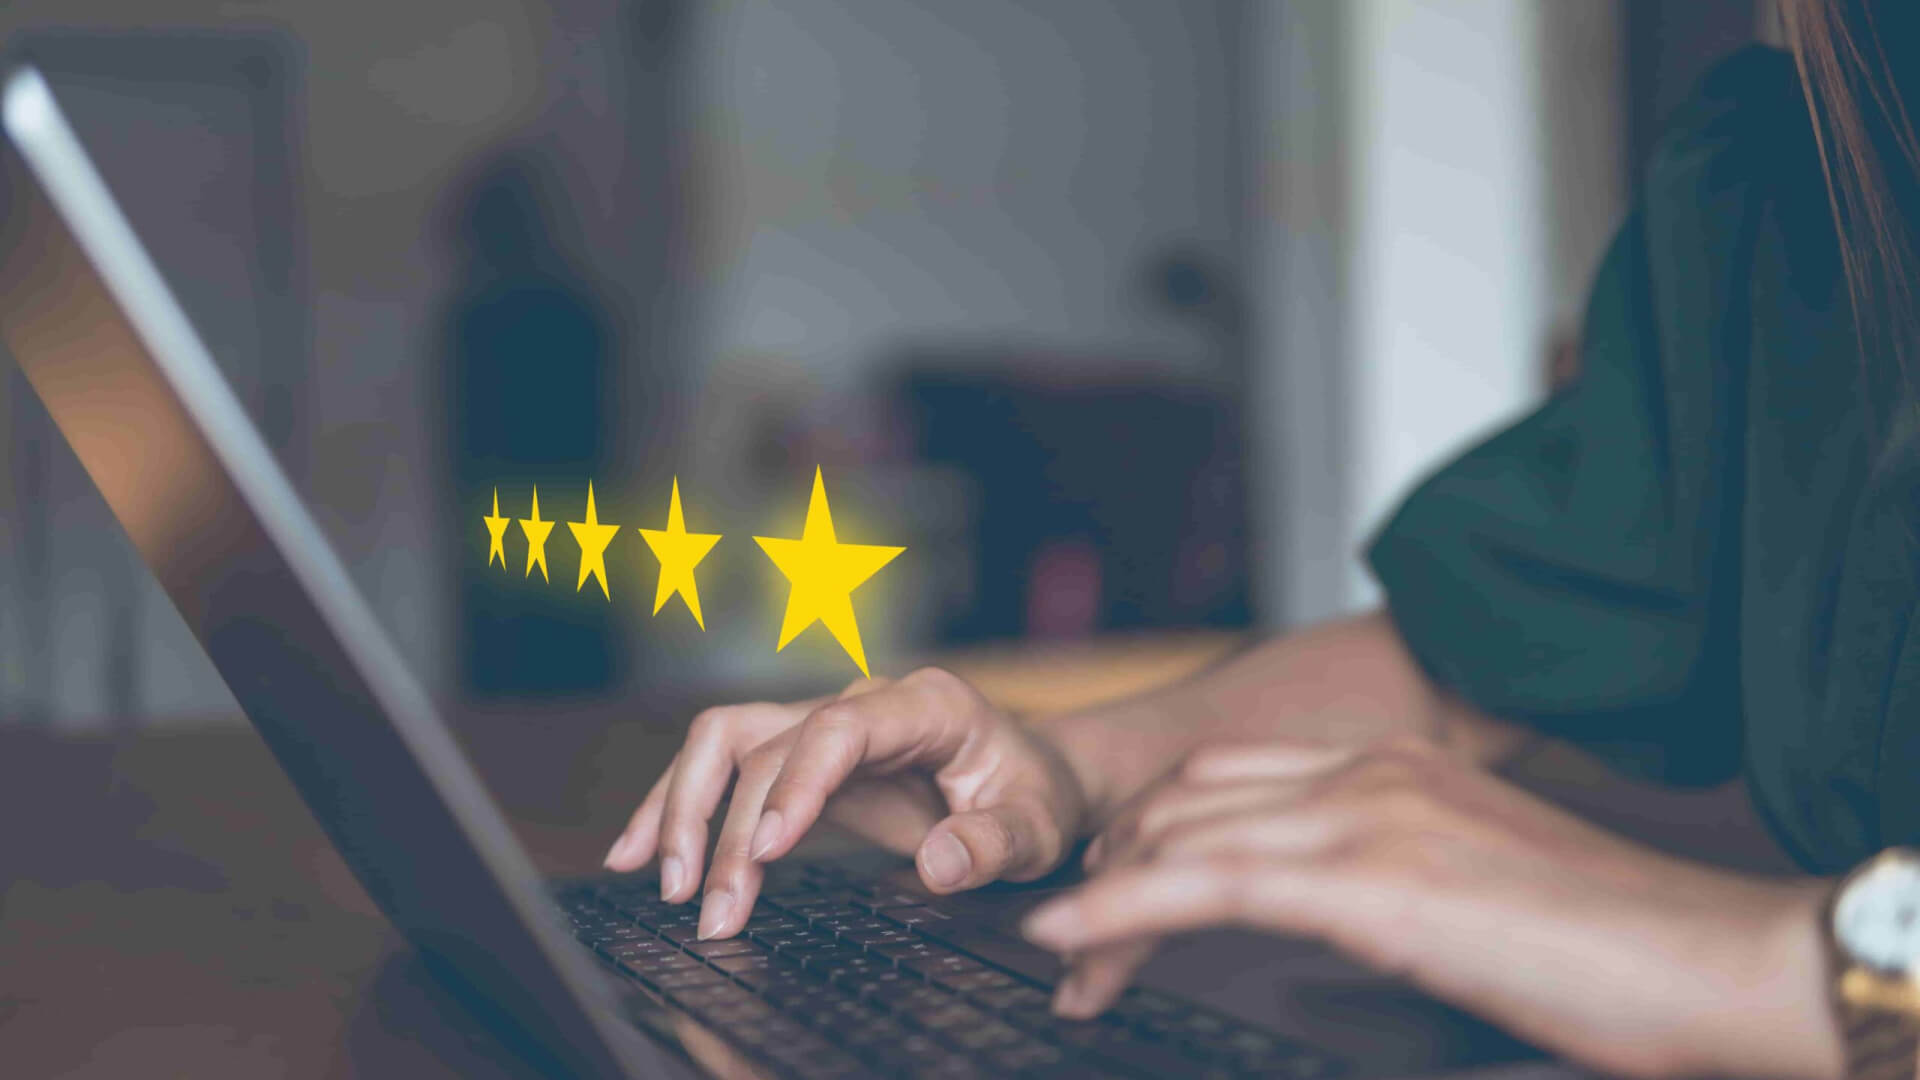 Hands typing on a laptop with four floating yellow stars above, in a dimly lit room.